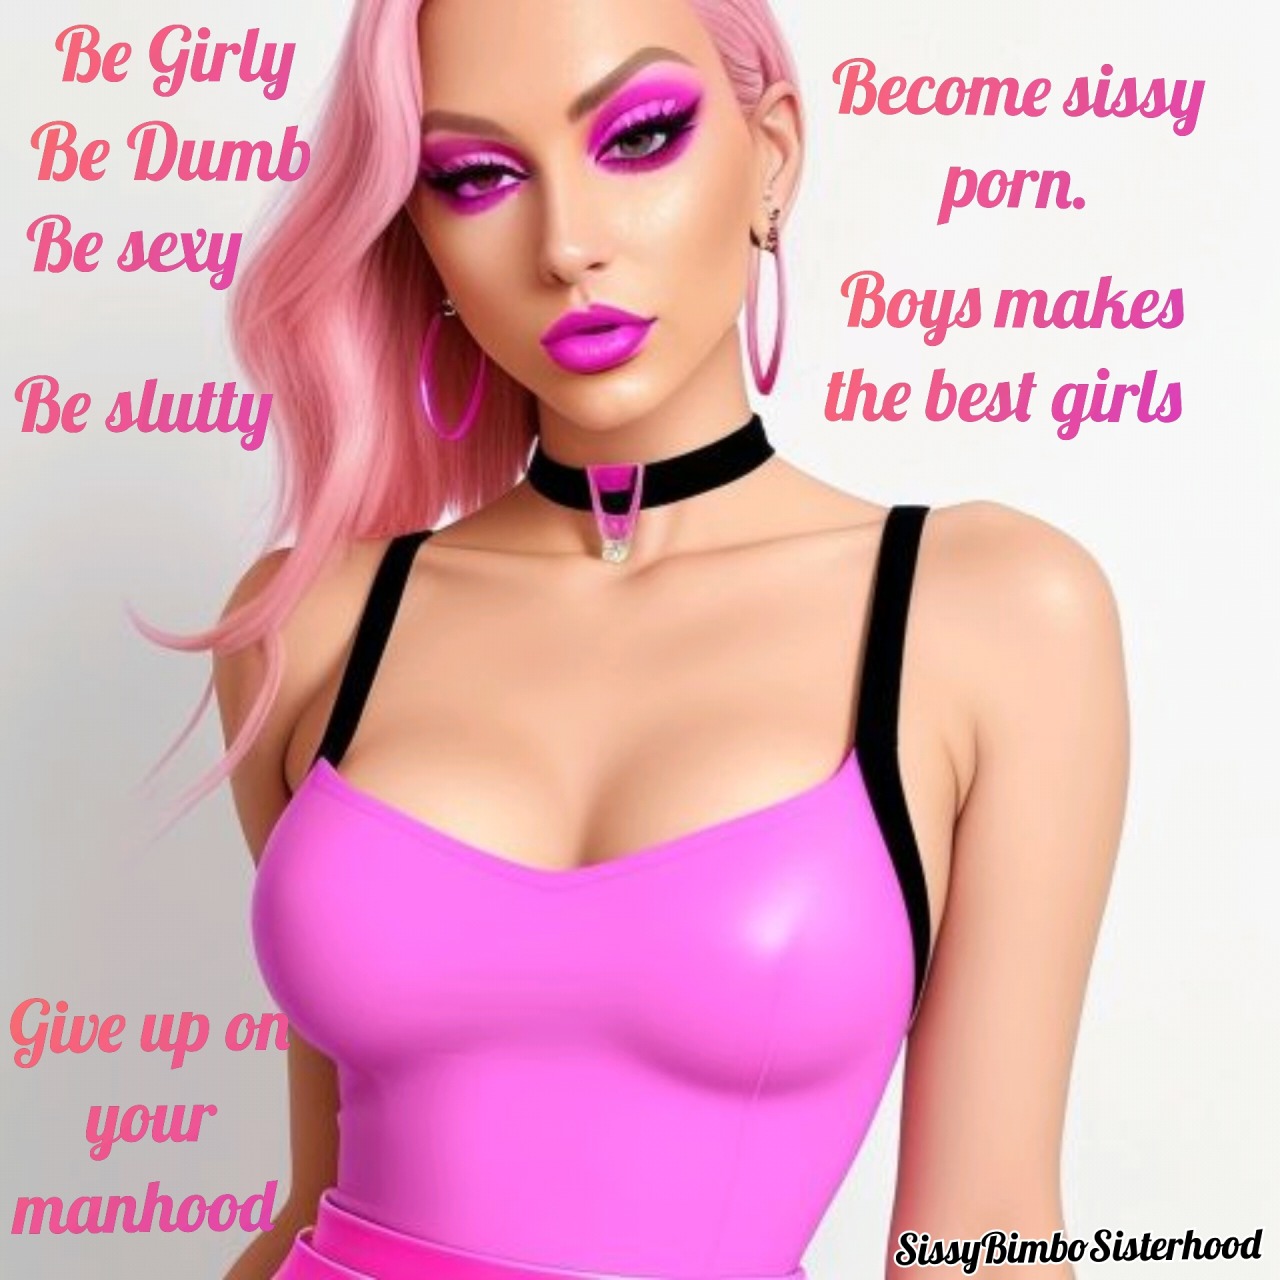 Girly Girly Girly is Me — Becoming sissy porn is the best thing that can... picture